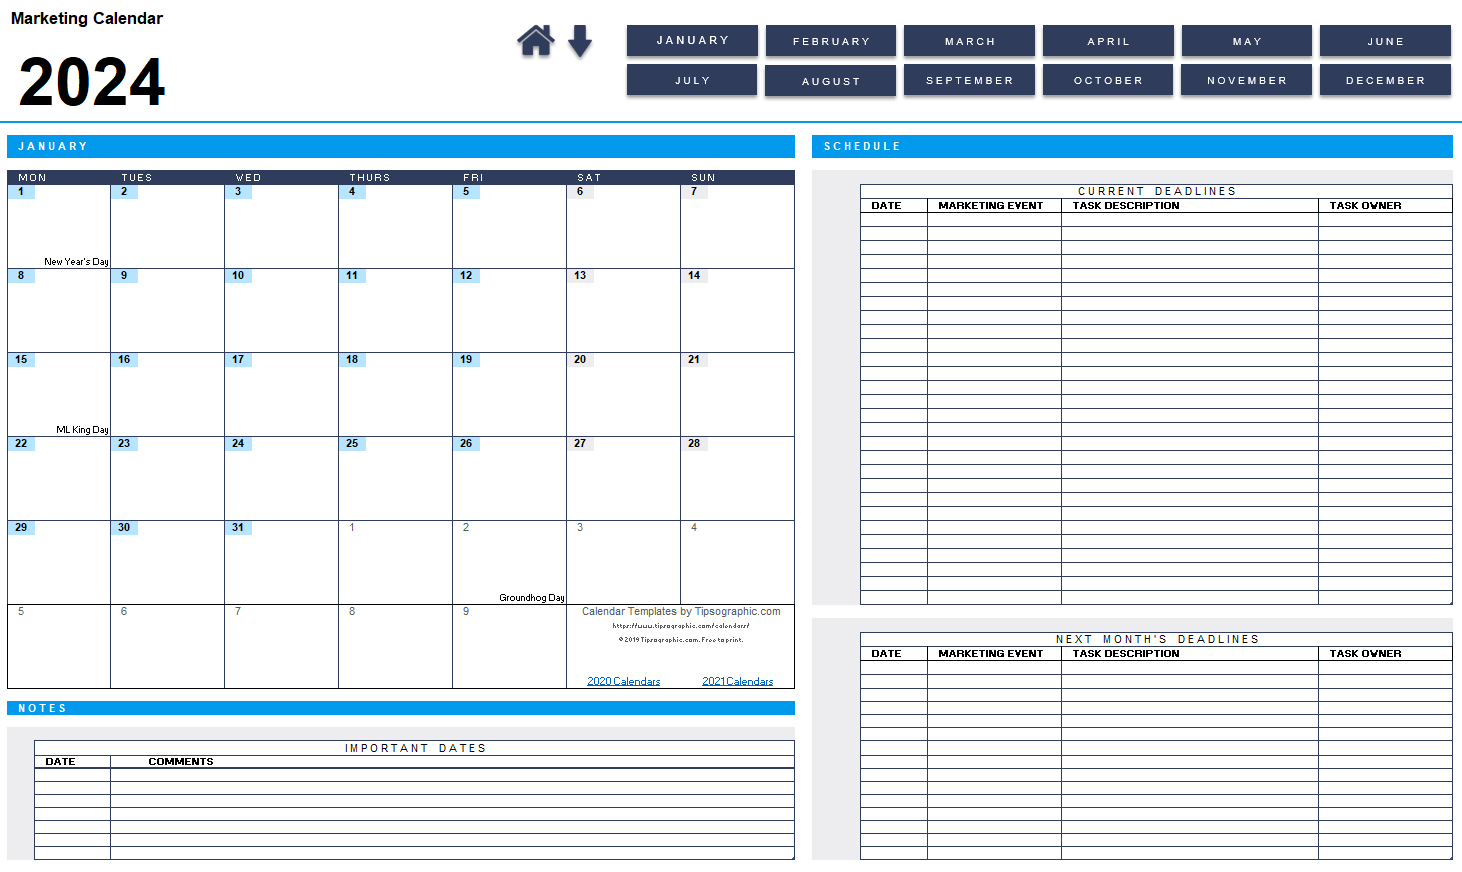 Download the 2024 Retail Marketing Calendar (Blank) Tipsographic